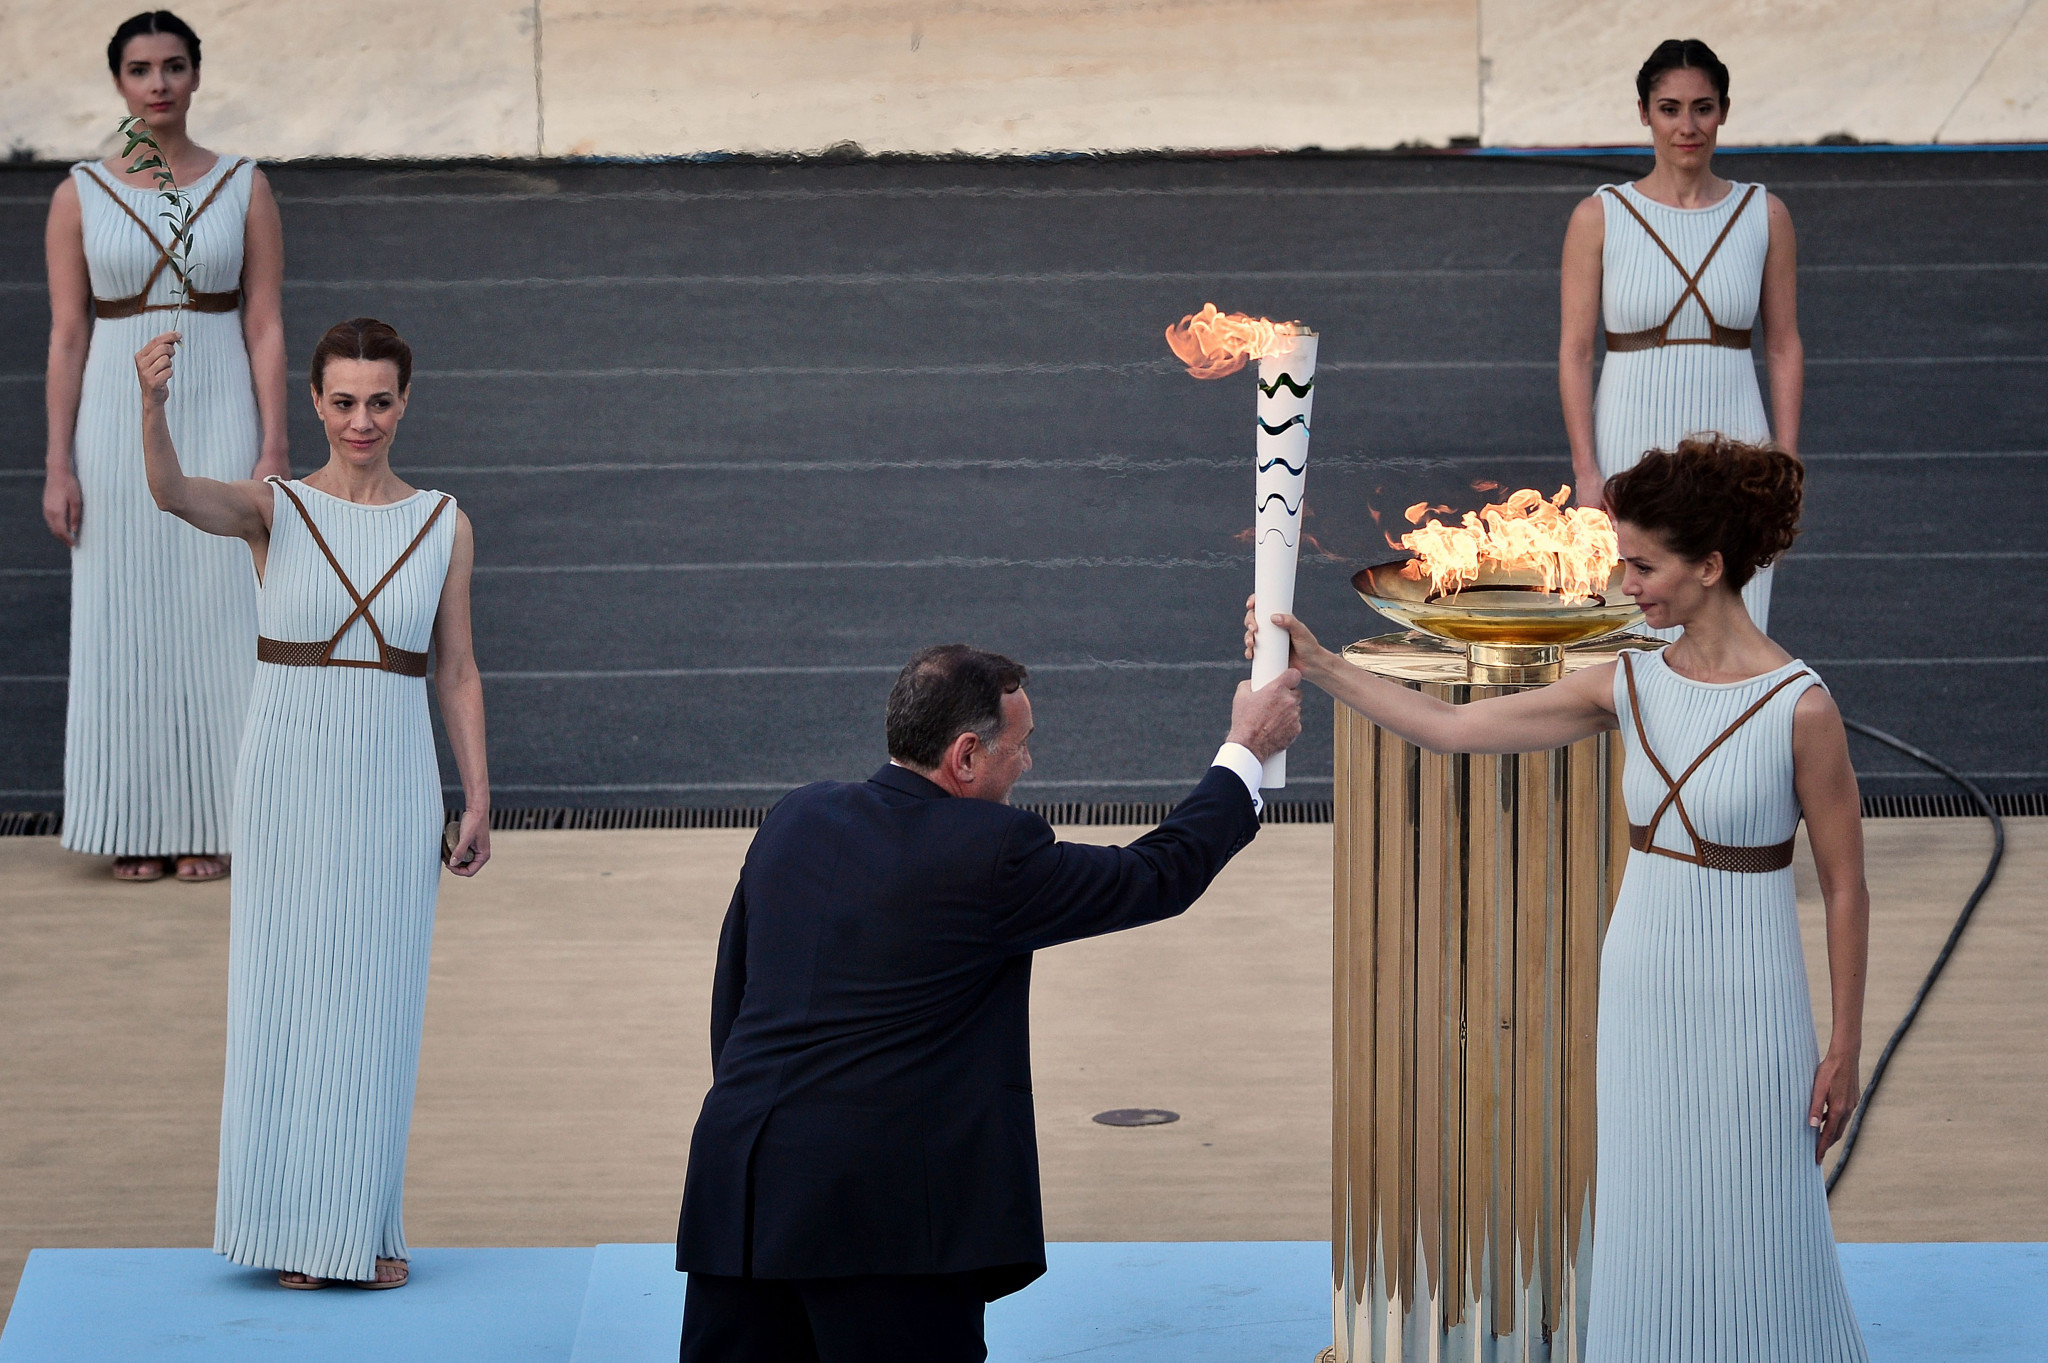 Tokyo 2020 Torch Relay organisers consult with Greek health agencies due to coronavirus worries